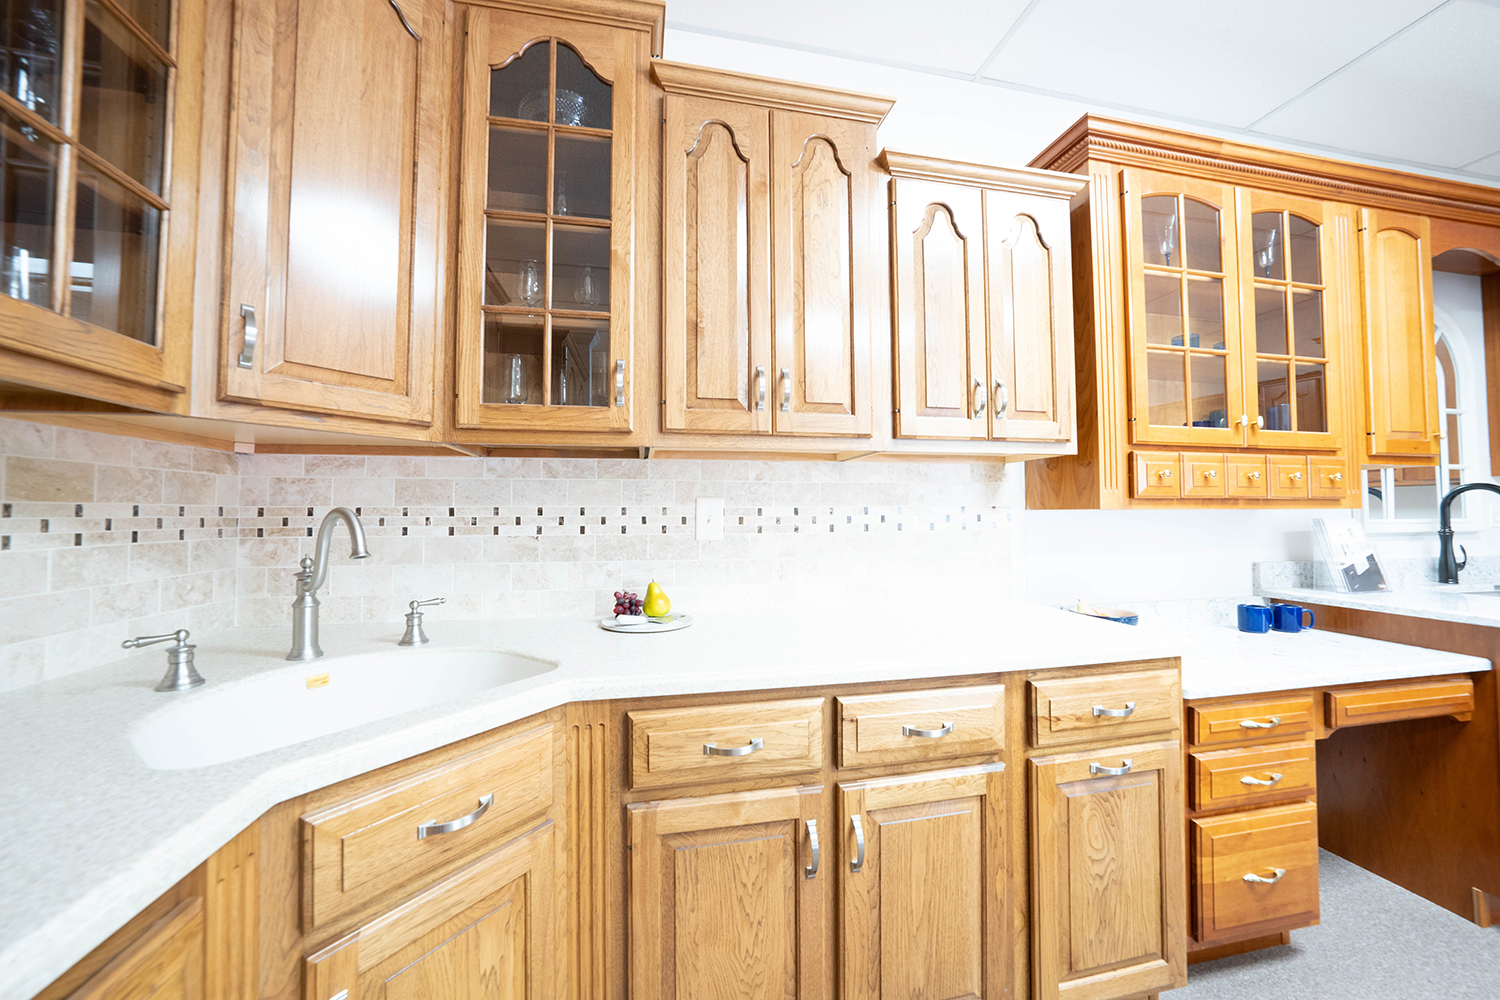 Kitchen display featuring hickory cabinets, Corian countertops, and a stone backsplash